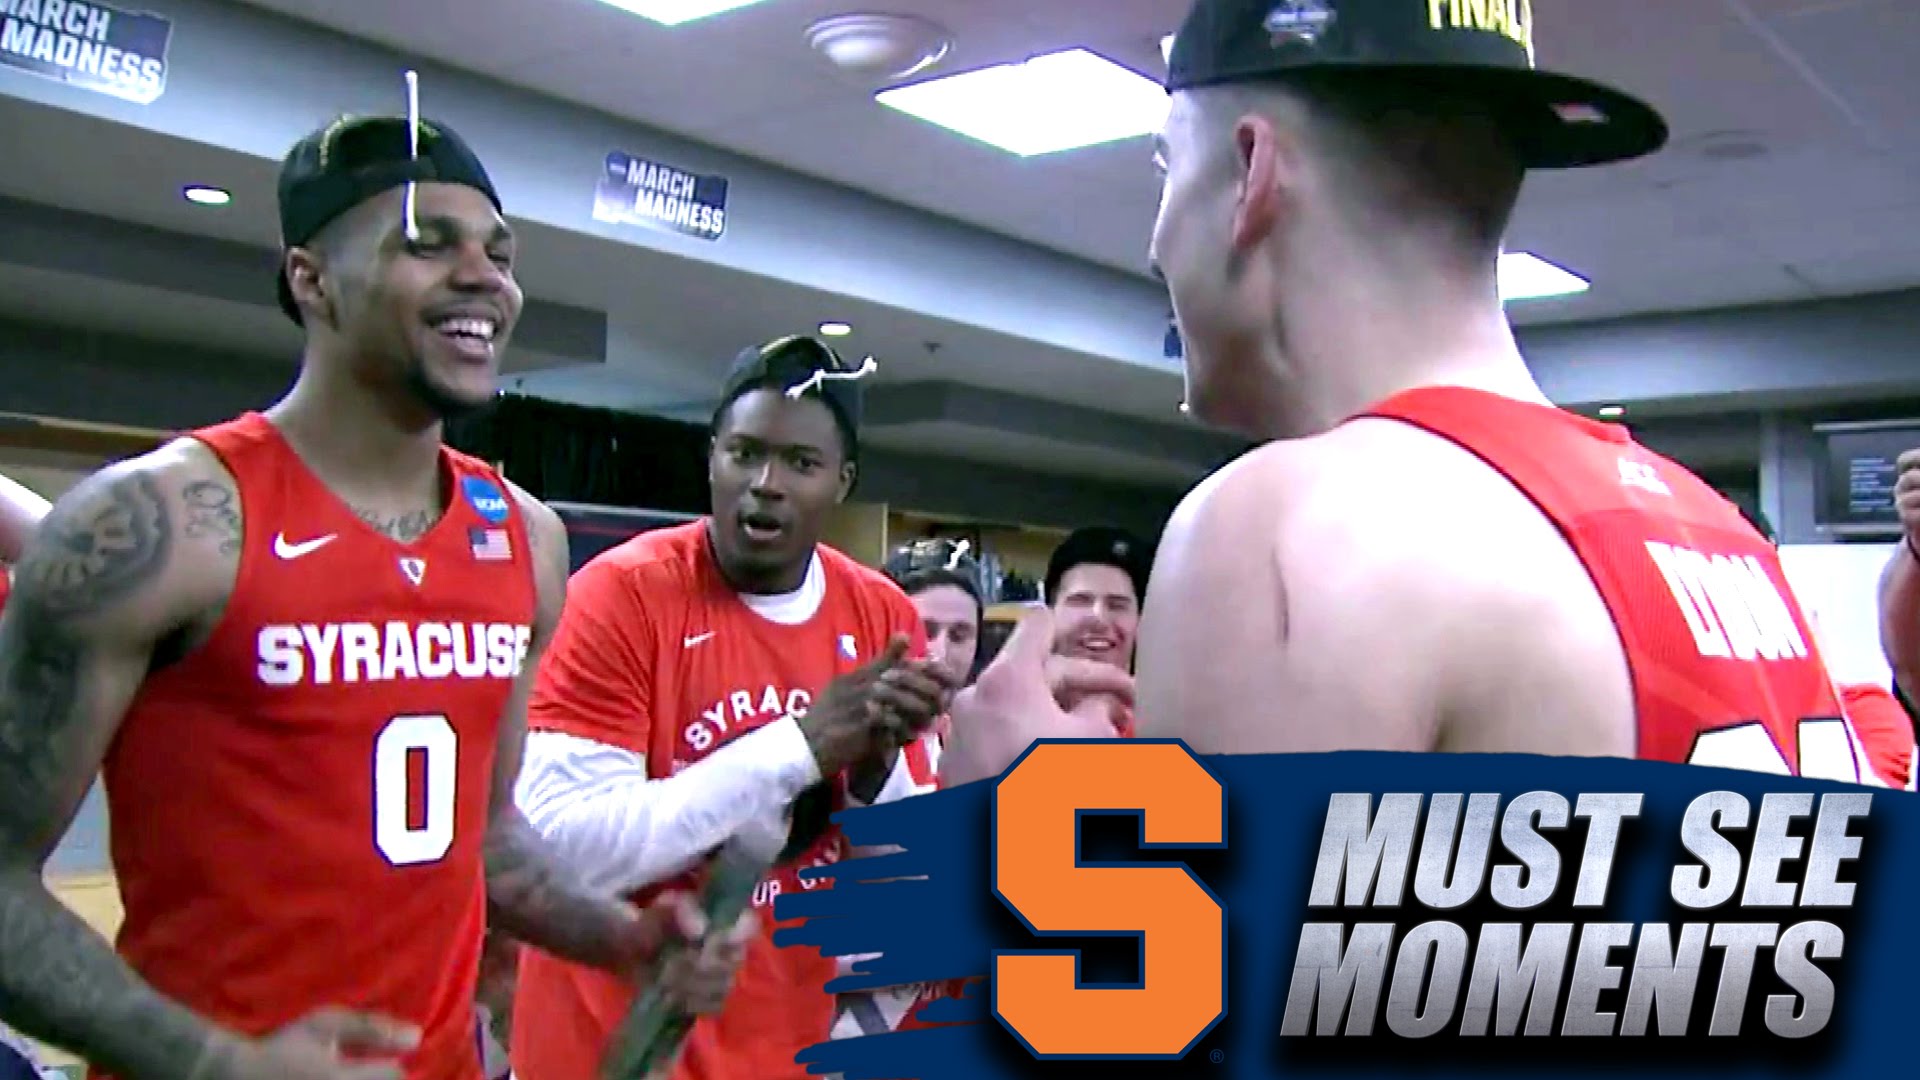 Jim Boeheim gives locker room speech to Syracuse after advancing to Final Four